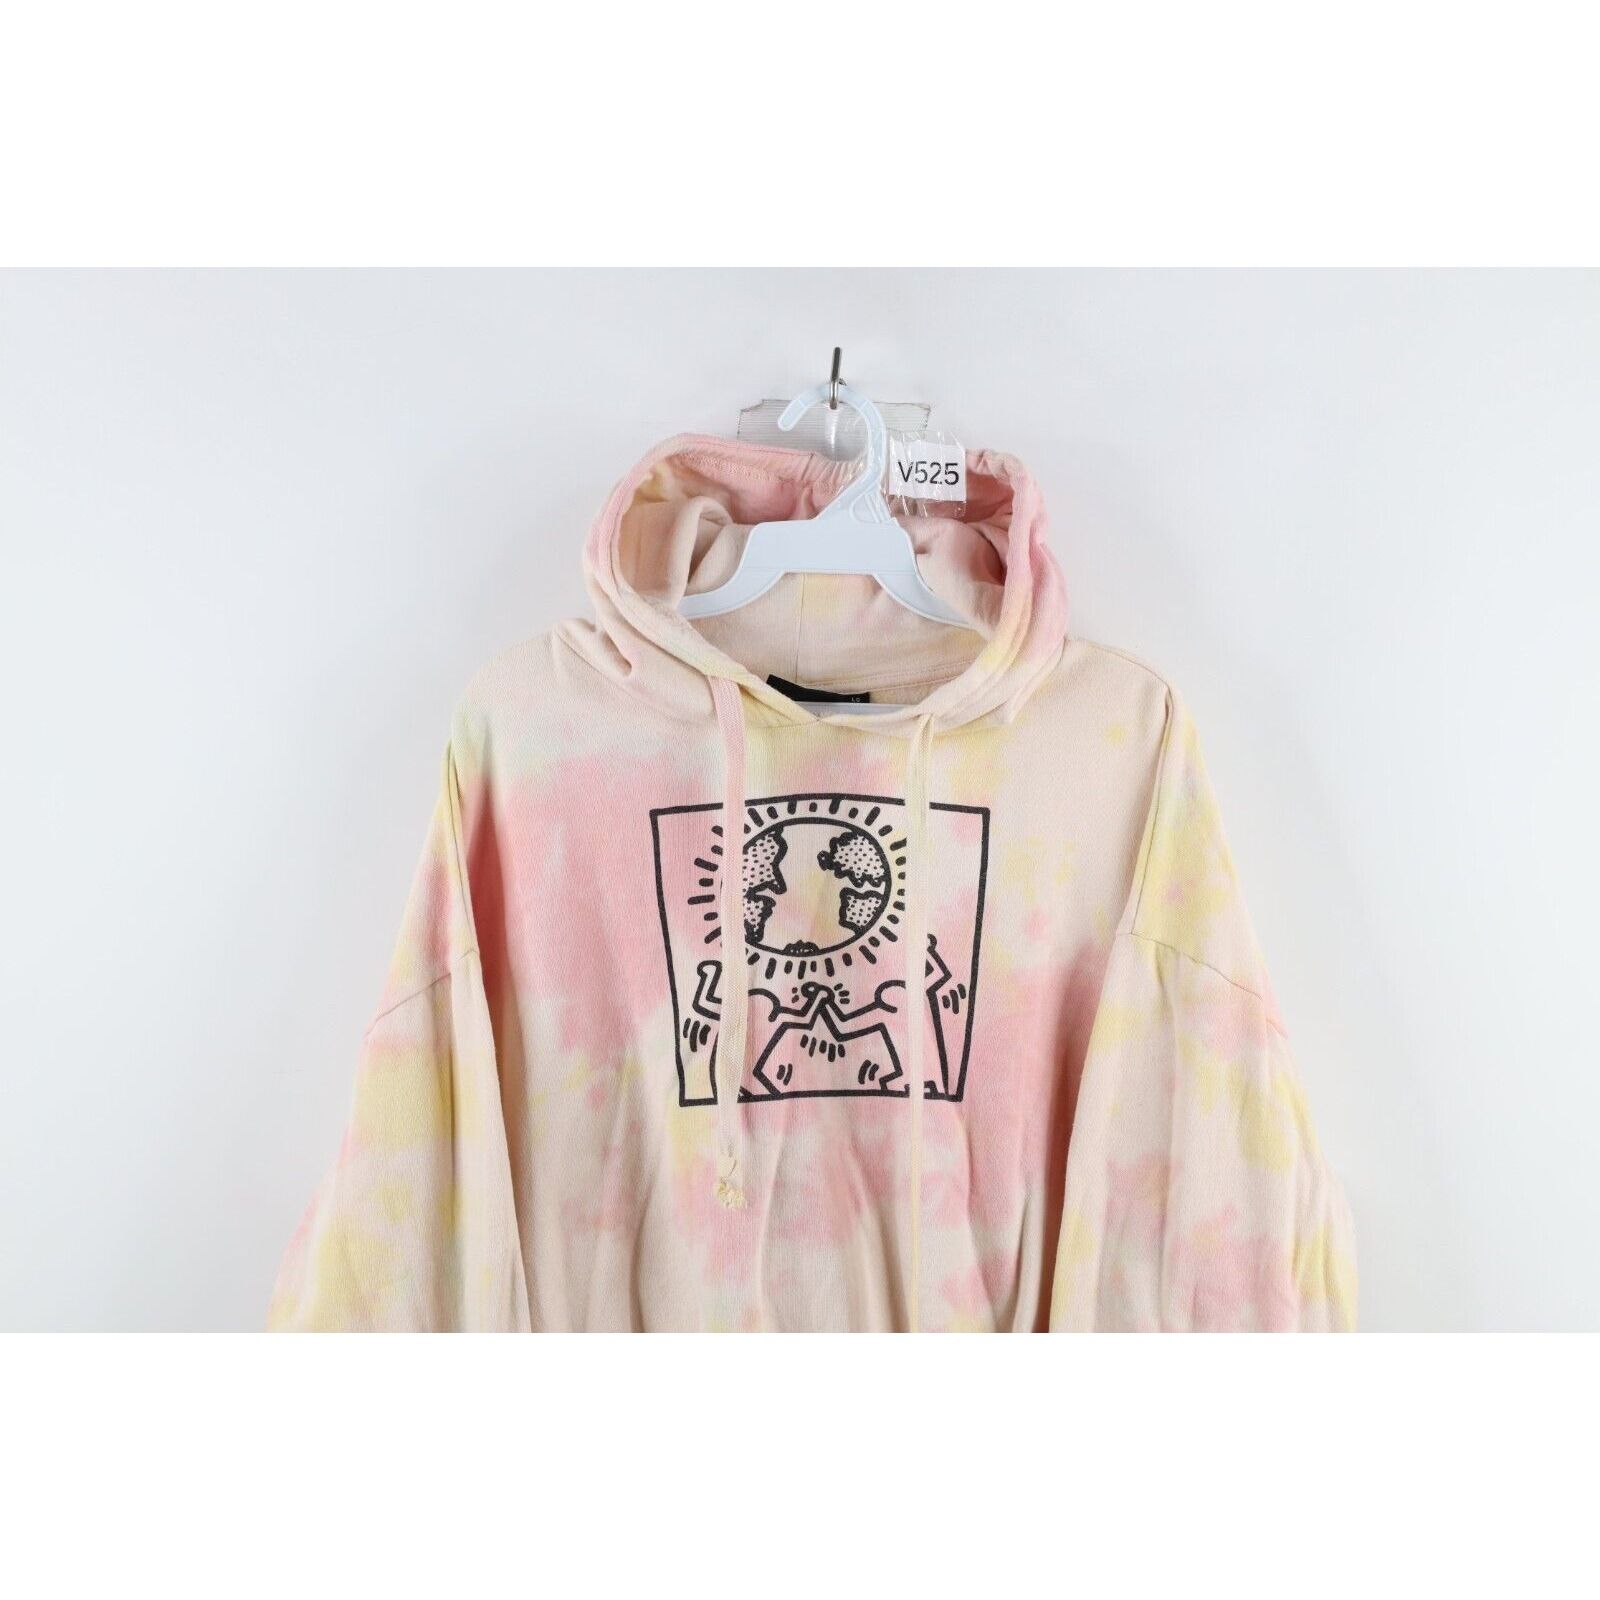 Vintage Retro Keith Haring Acid Wash Earth Day Art Cropped Hoodie Size L / US 10 / IT 46 - 2 Preview